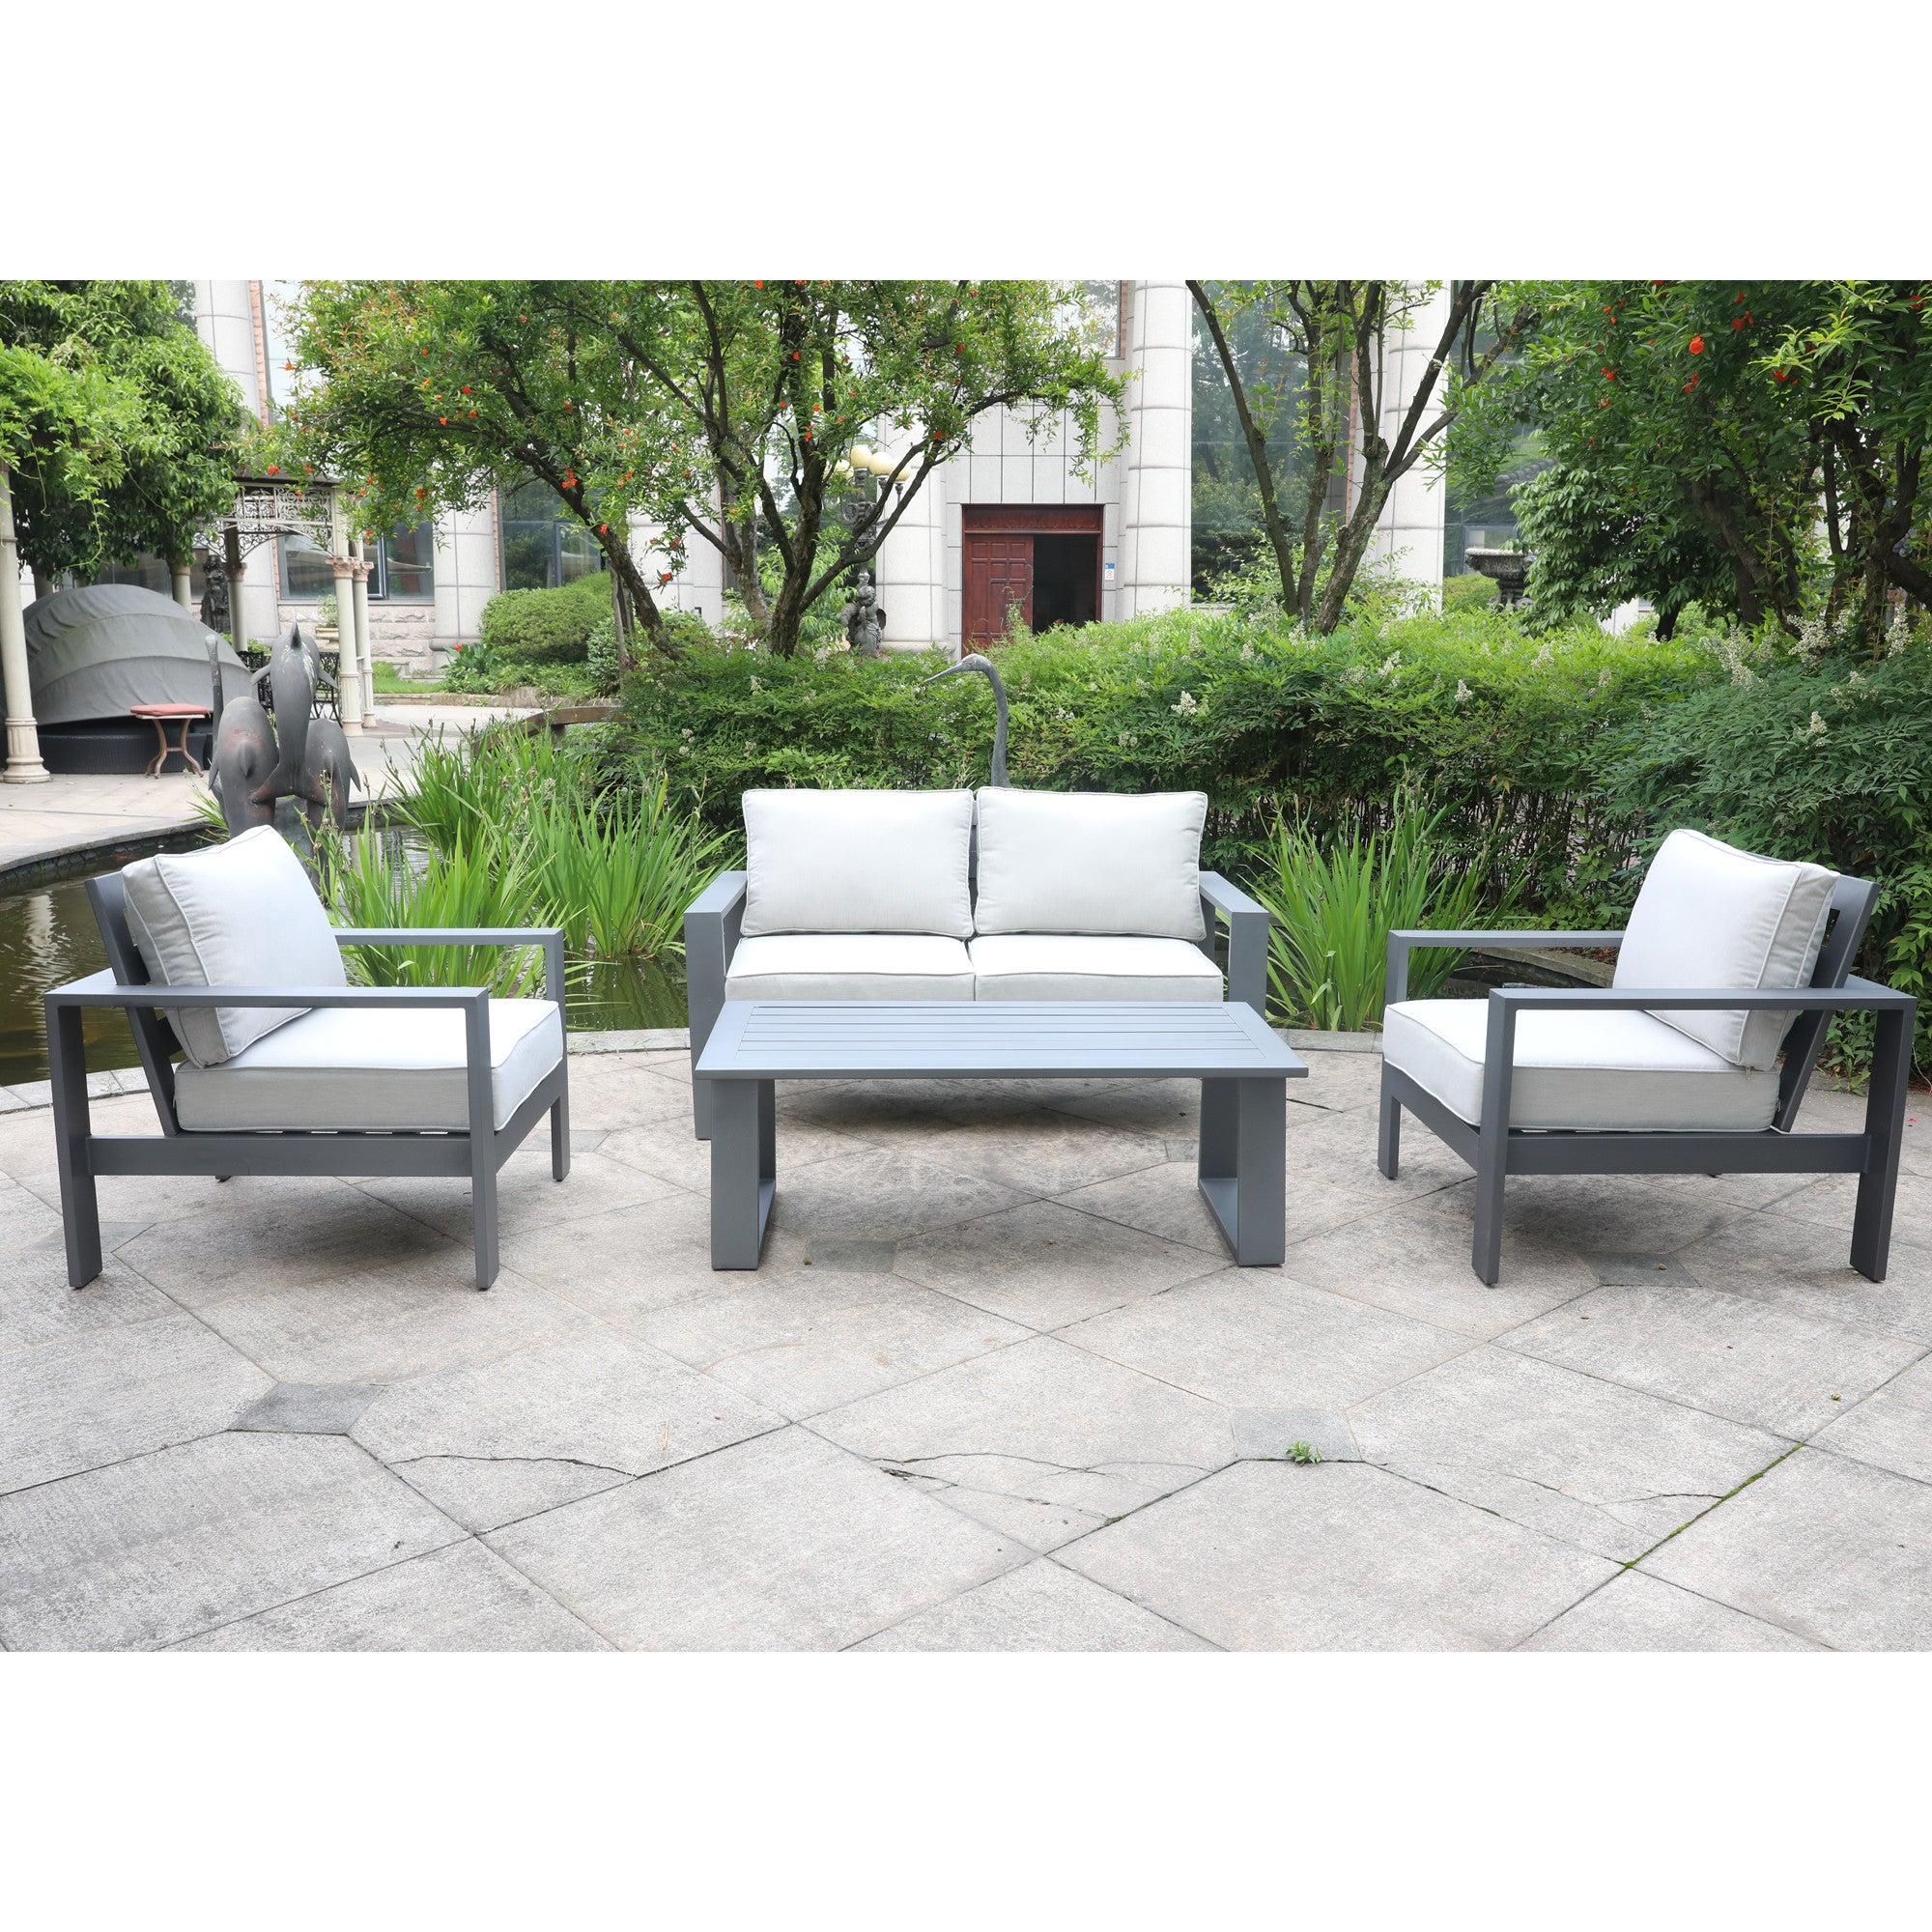 4 Piece Sofa Seating Group with Cushions, Powdered pewter-polyester-aluminum